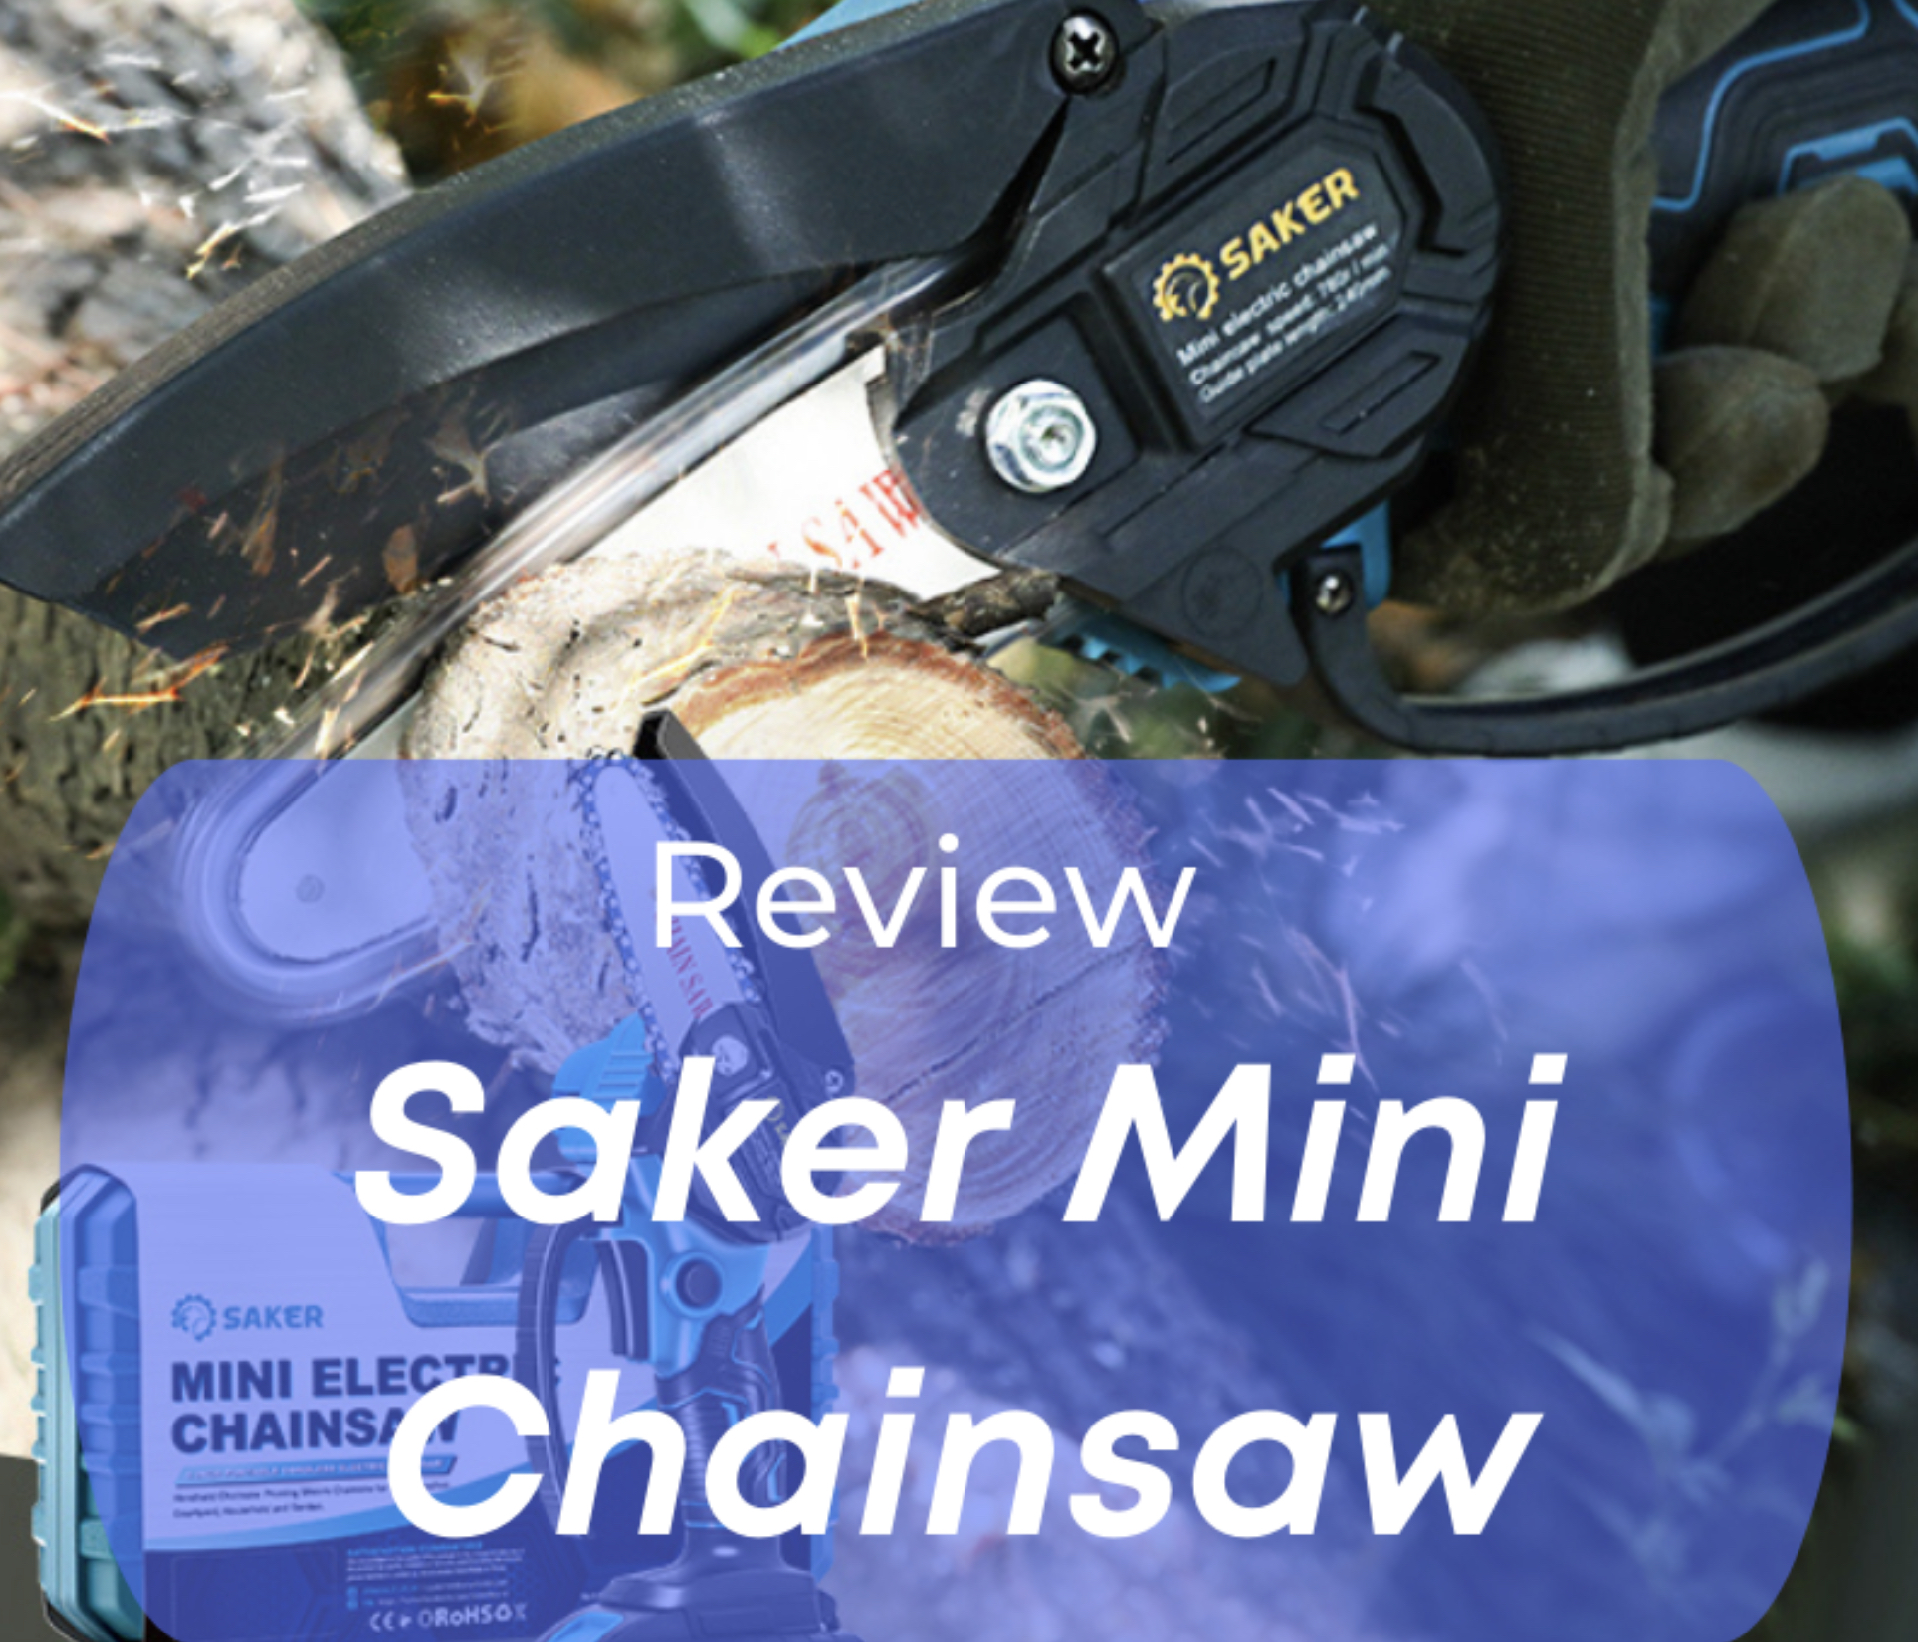 Sculpting with Precision: A Comprehensive Saker Mini Chainsaw Review for Wood Carving Artists